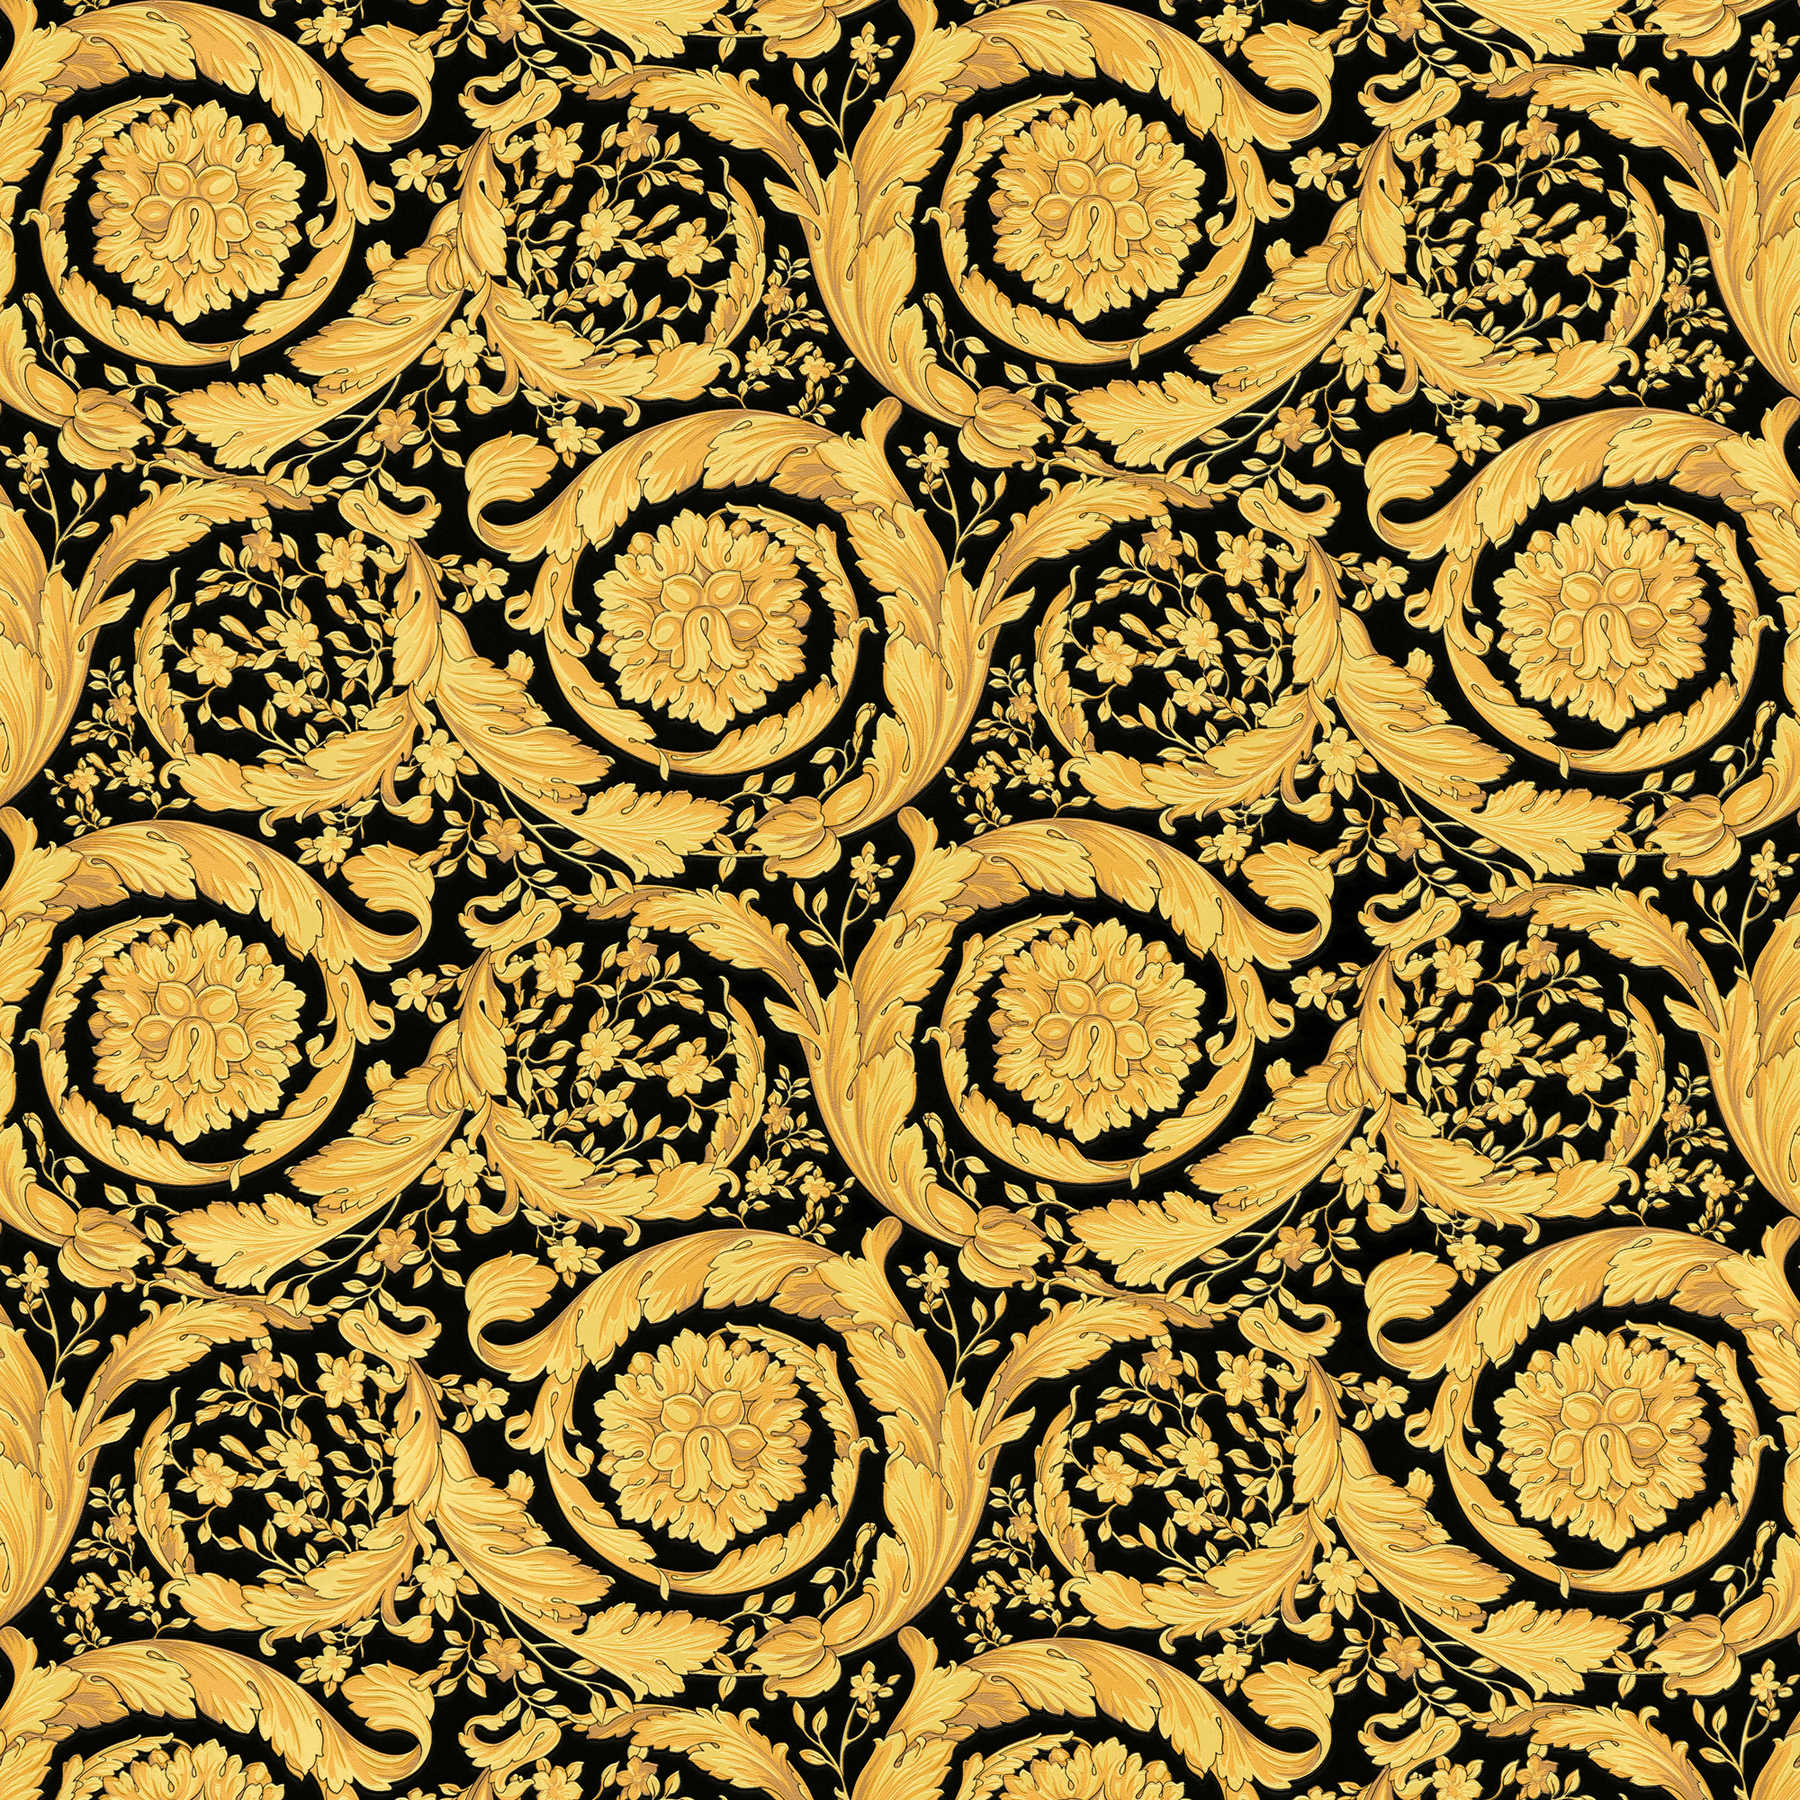 VERSACE wallpaper with ornamental floral pattern - gold, black
